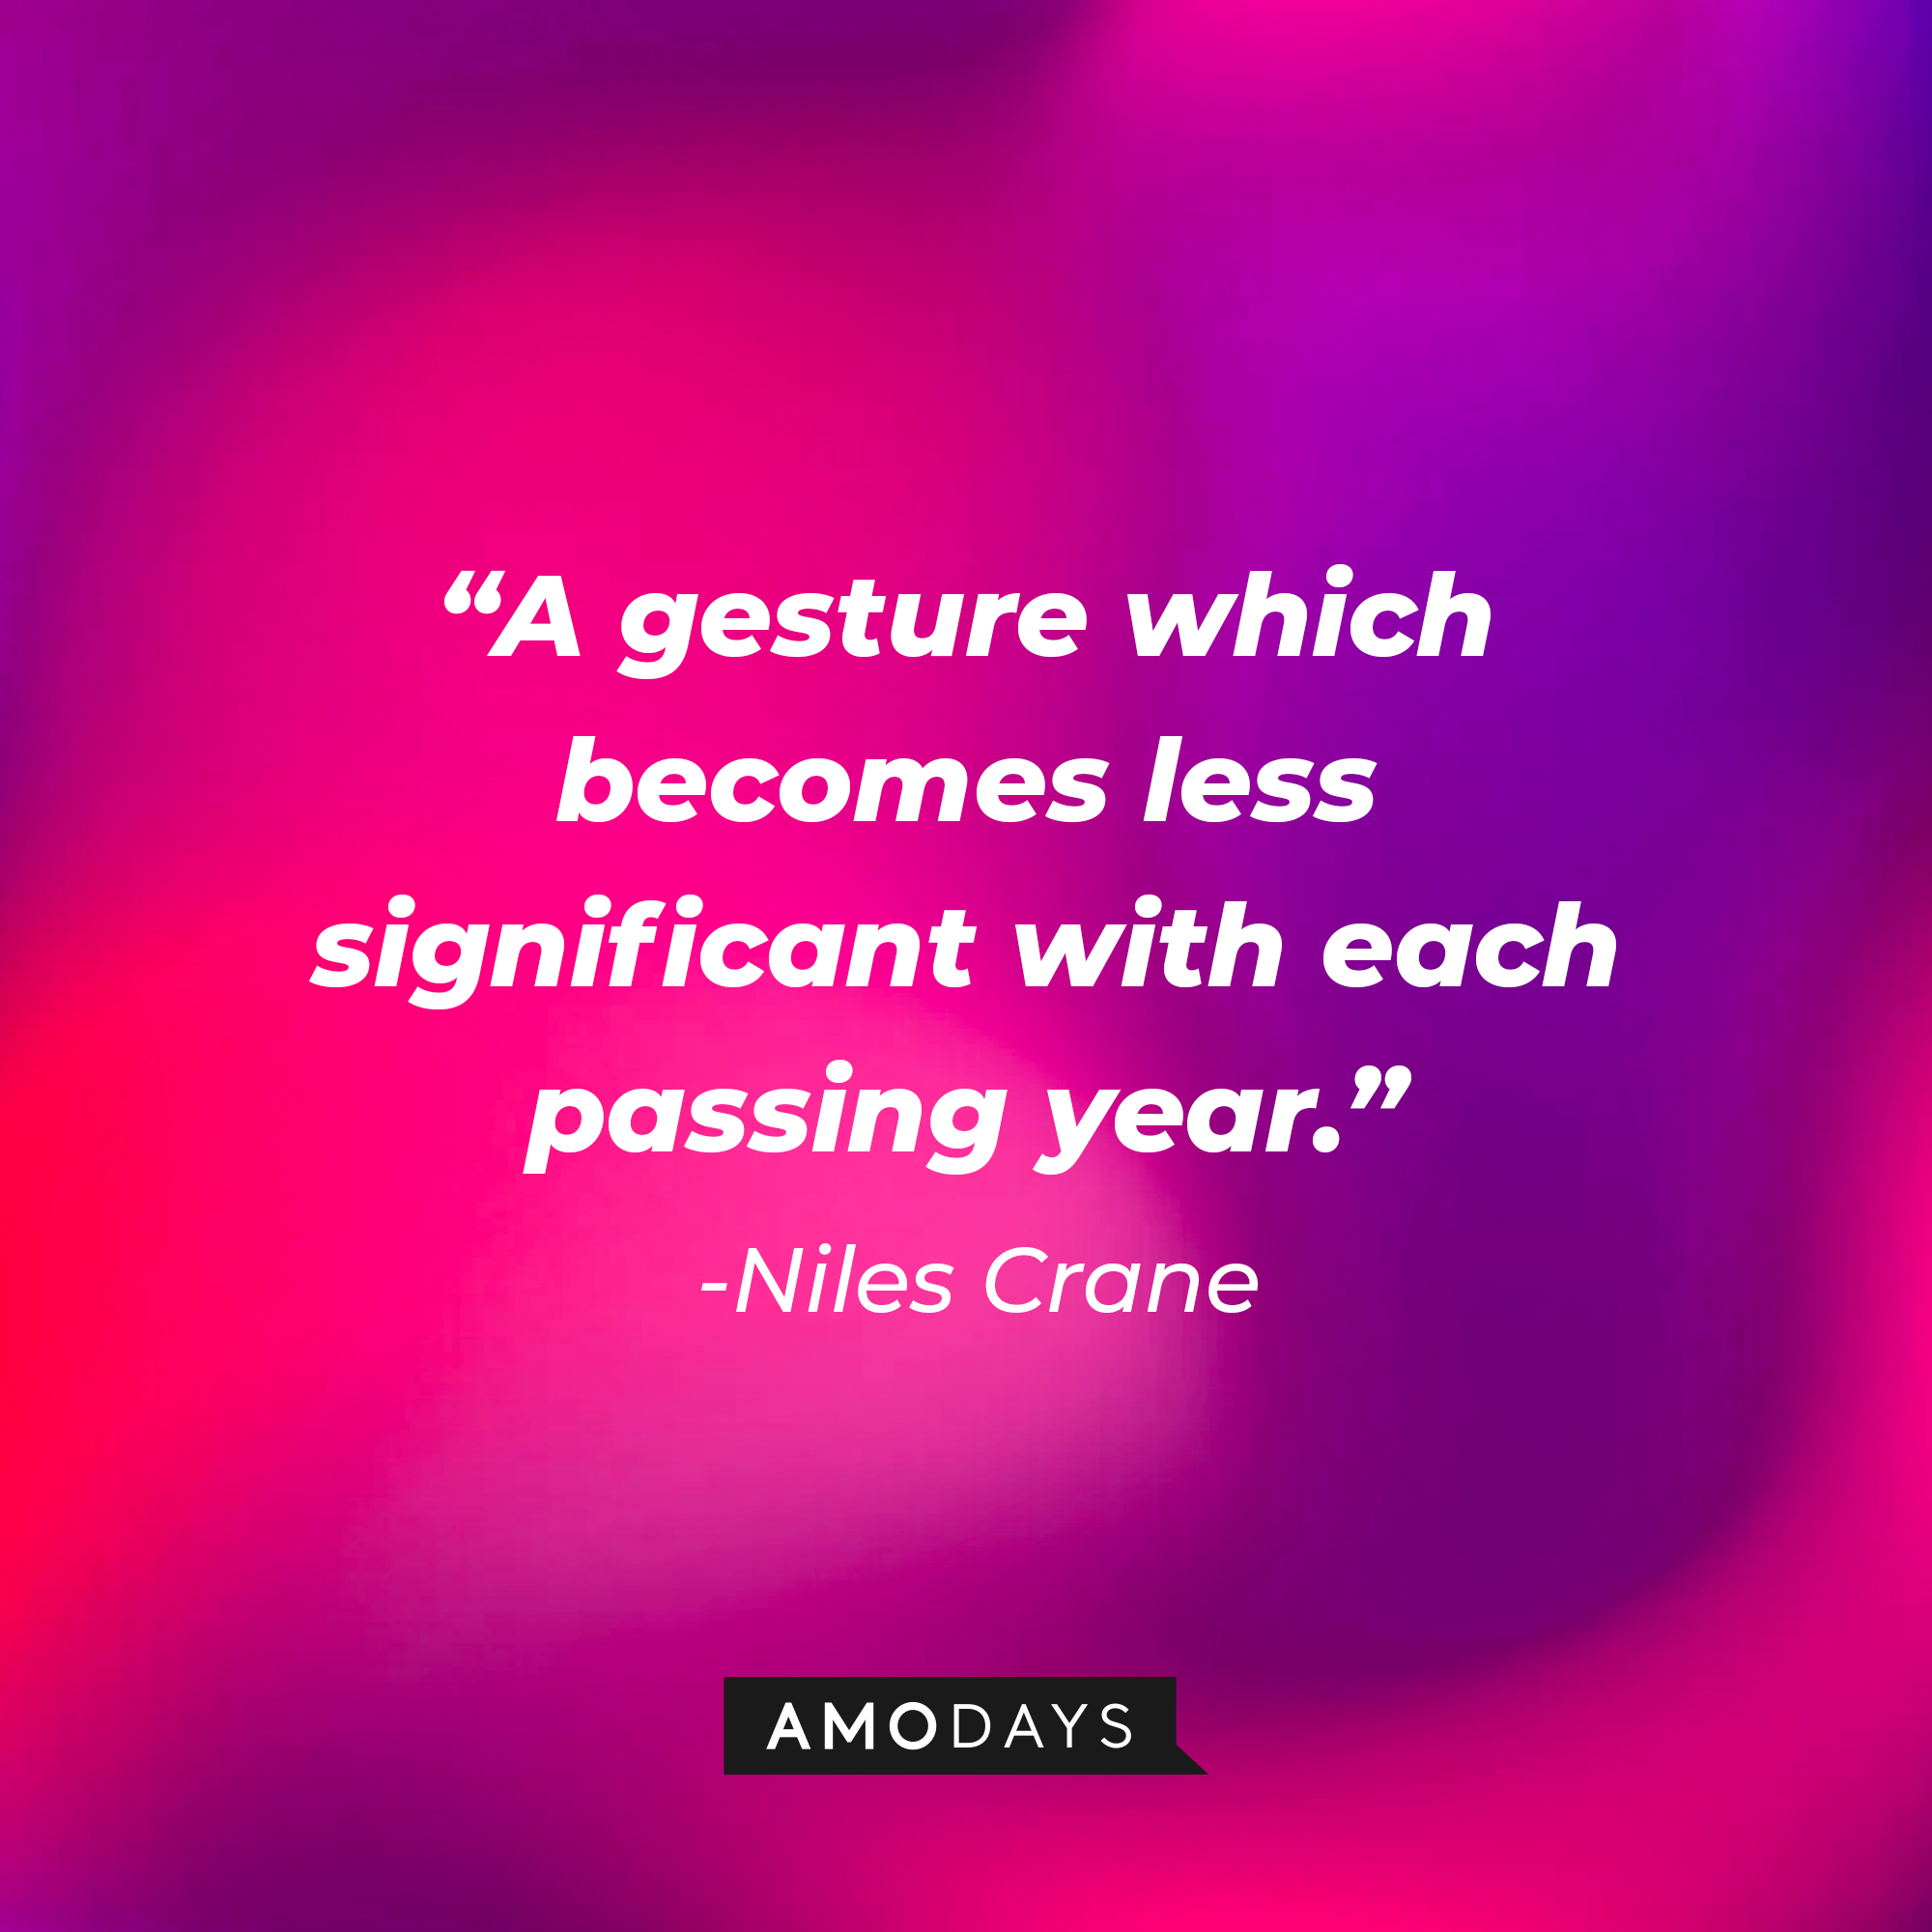 Niles Crane’s quote: “A gesture which becomes less significant with each passing year.” | Source: AmoDays